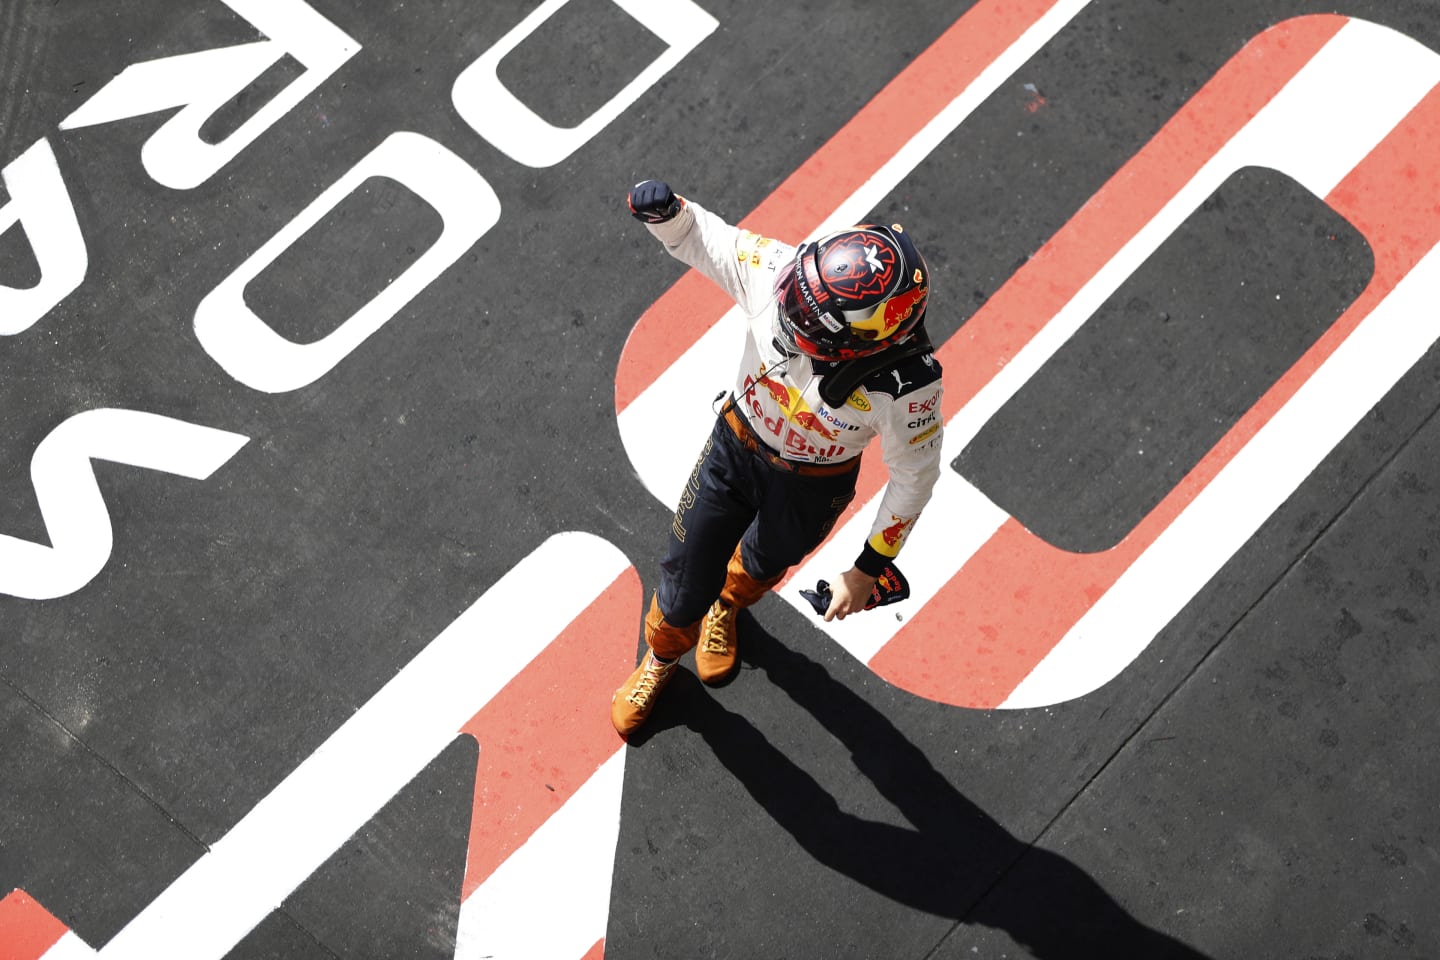 CIRCUIT OF THE AMERICAS, UNITED STATES OF AMERICA - OCTOBER 21: Max Verstappen, Red Bull Racing,